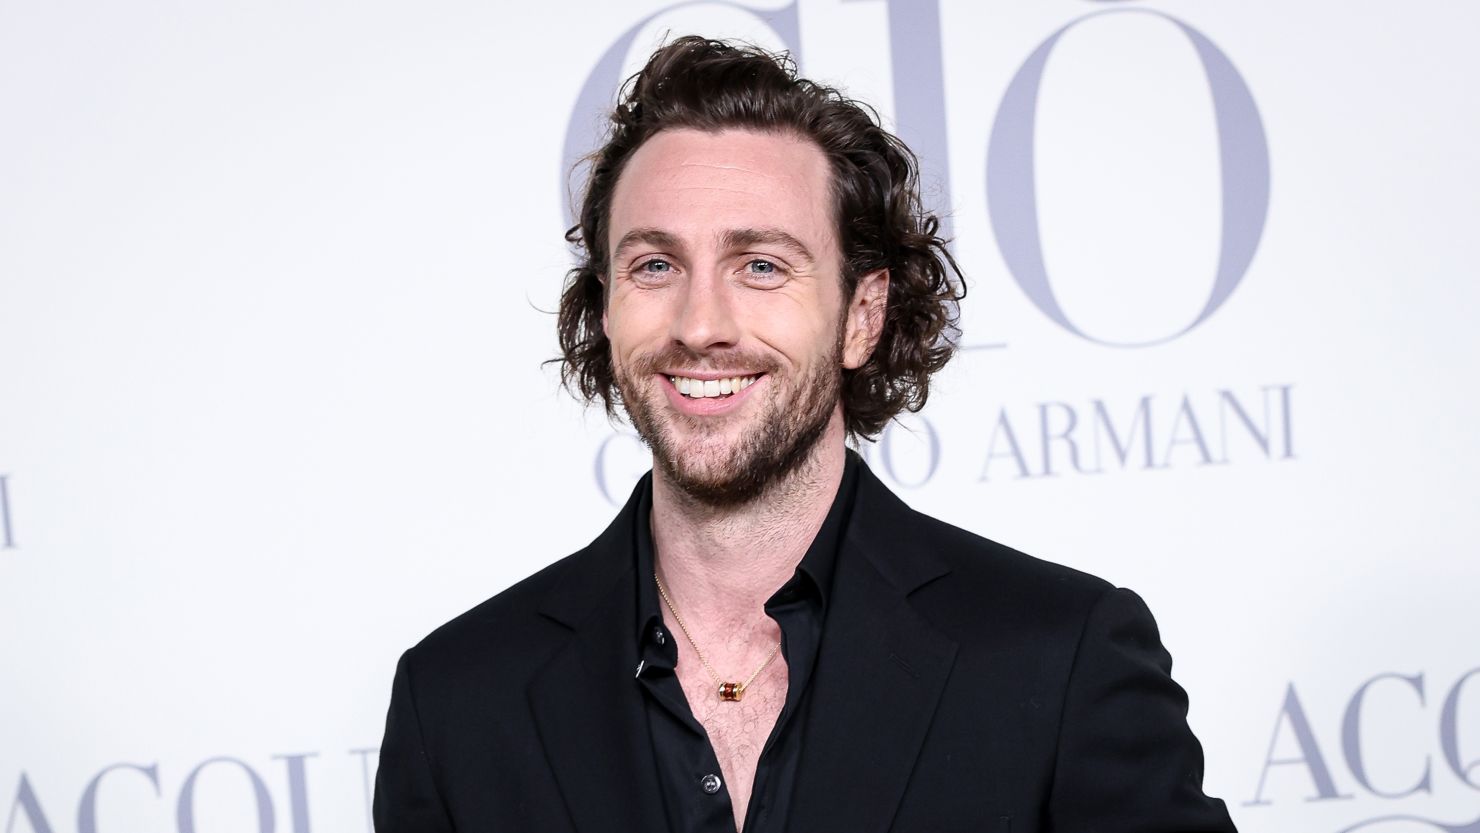 Aaron Taylor-Johnson could be the next James Bond, according to British tabloid newspaper The Sun.